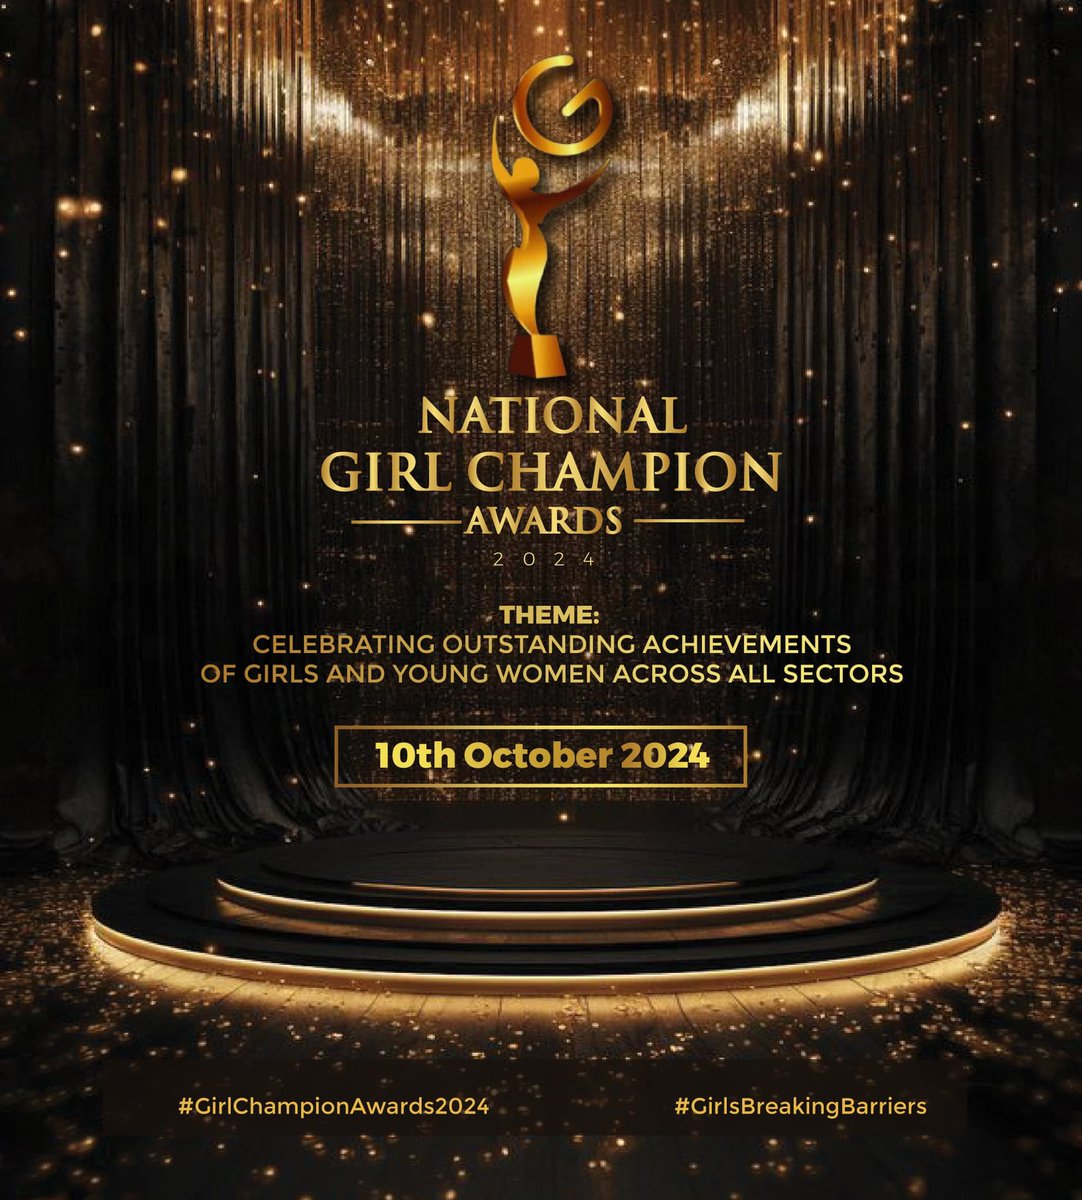 We are Bringing to you the National #GirlChampionAwards2024
This year we shall consider Girls from all Regions &shine a spotlight 

Lets celebrate Outstanding Achievements made by Girls & Young women to make a lasting impact
#GirlsBreakingBarriers @ahfugandacares @girlsalliance